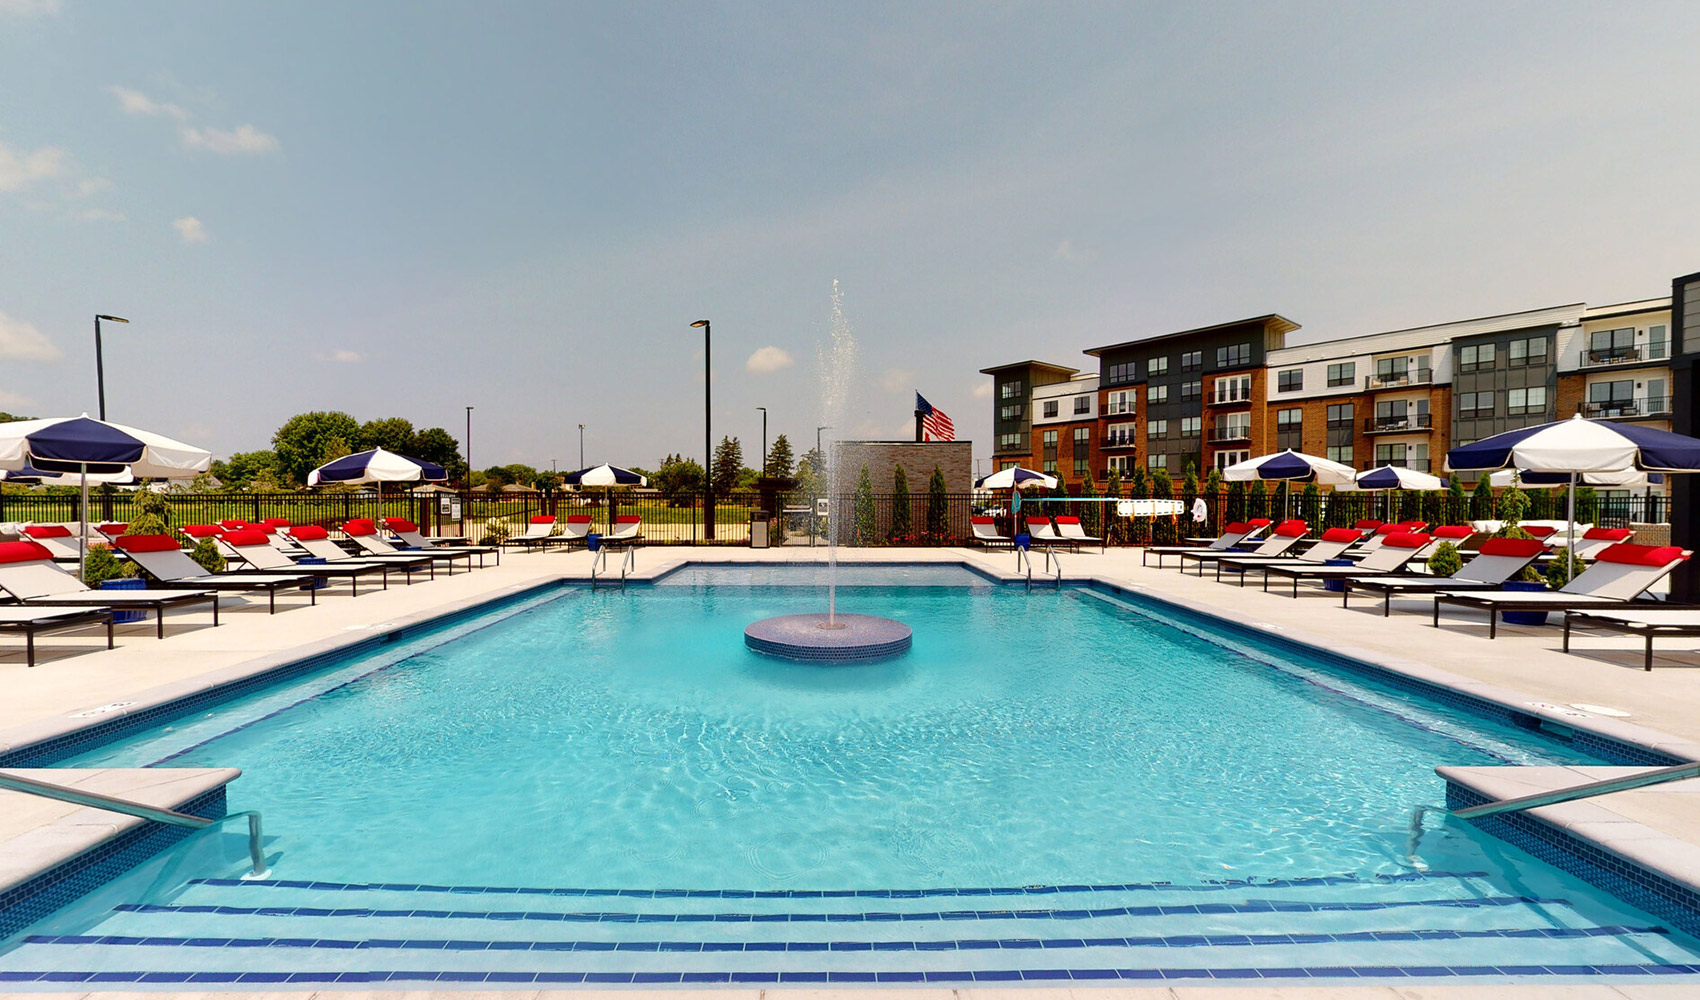 Expansive Pool Area at Hanover Park